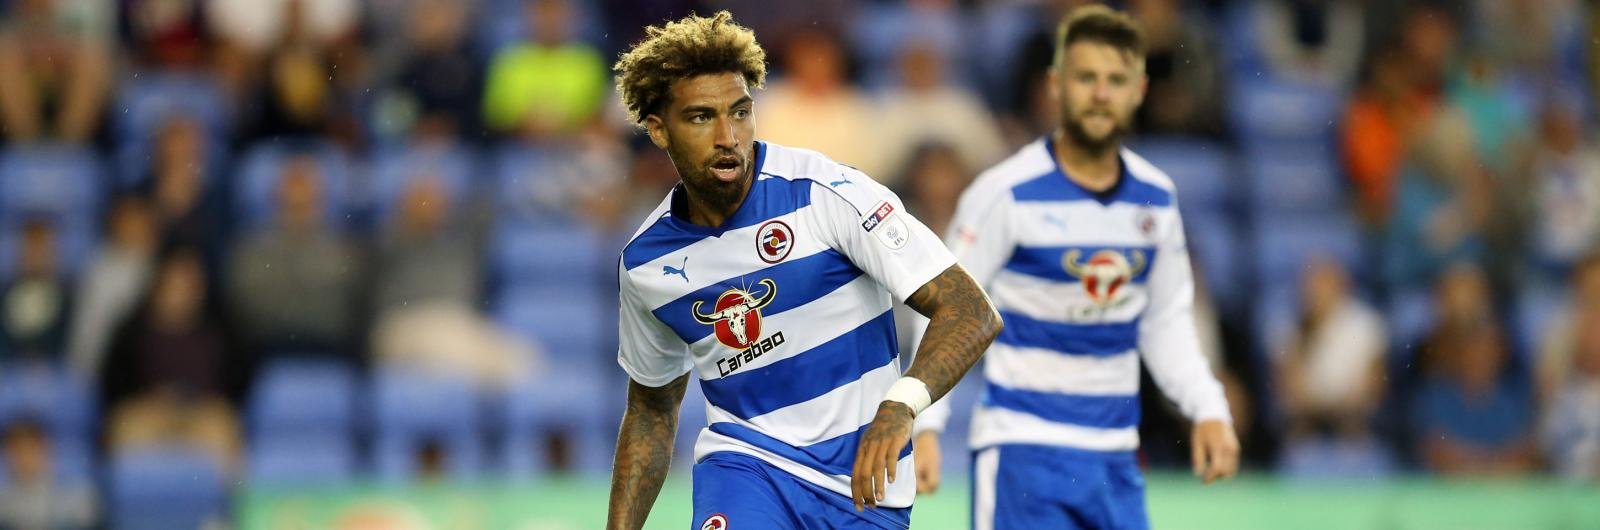 Championship Preview: Reading host Ipswich, leaders Huddersfield visit Leeds United